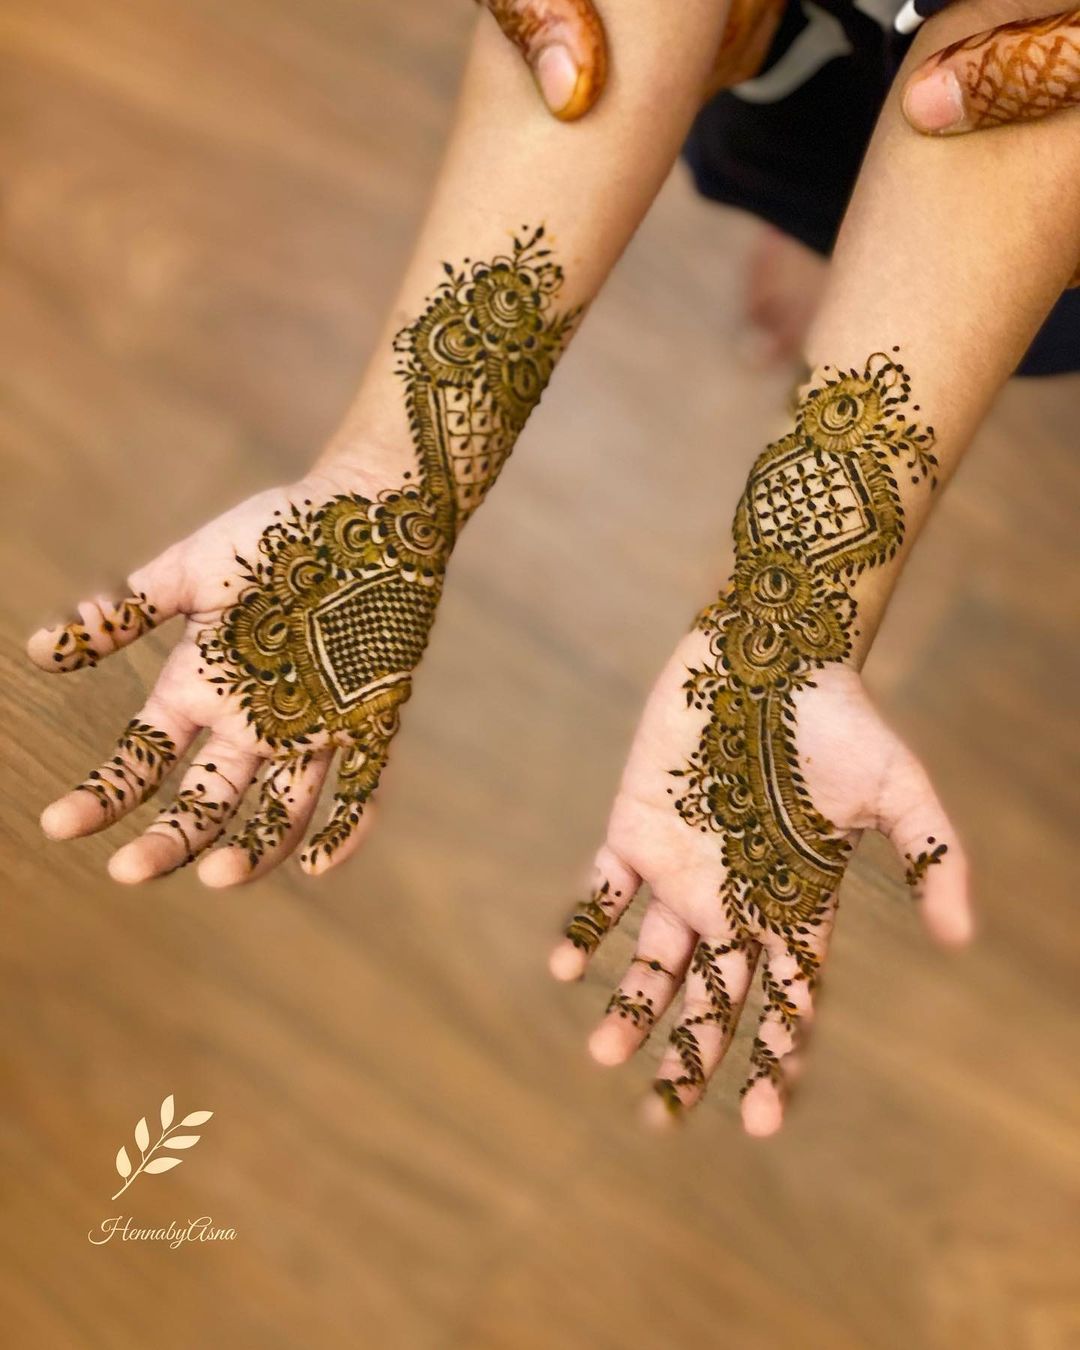 Some beautiful mehndi for her engagement💕 I love the little hearts on her  ring finger, it's such a personal and cute touch! ______... | Instagram